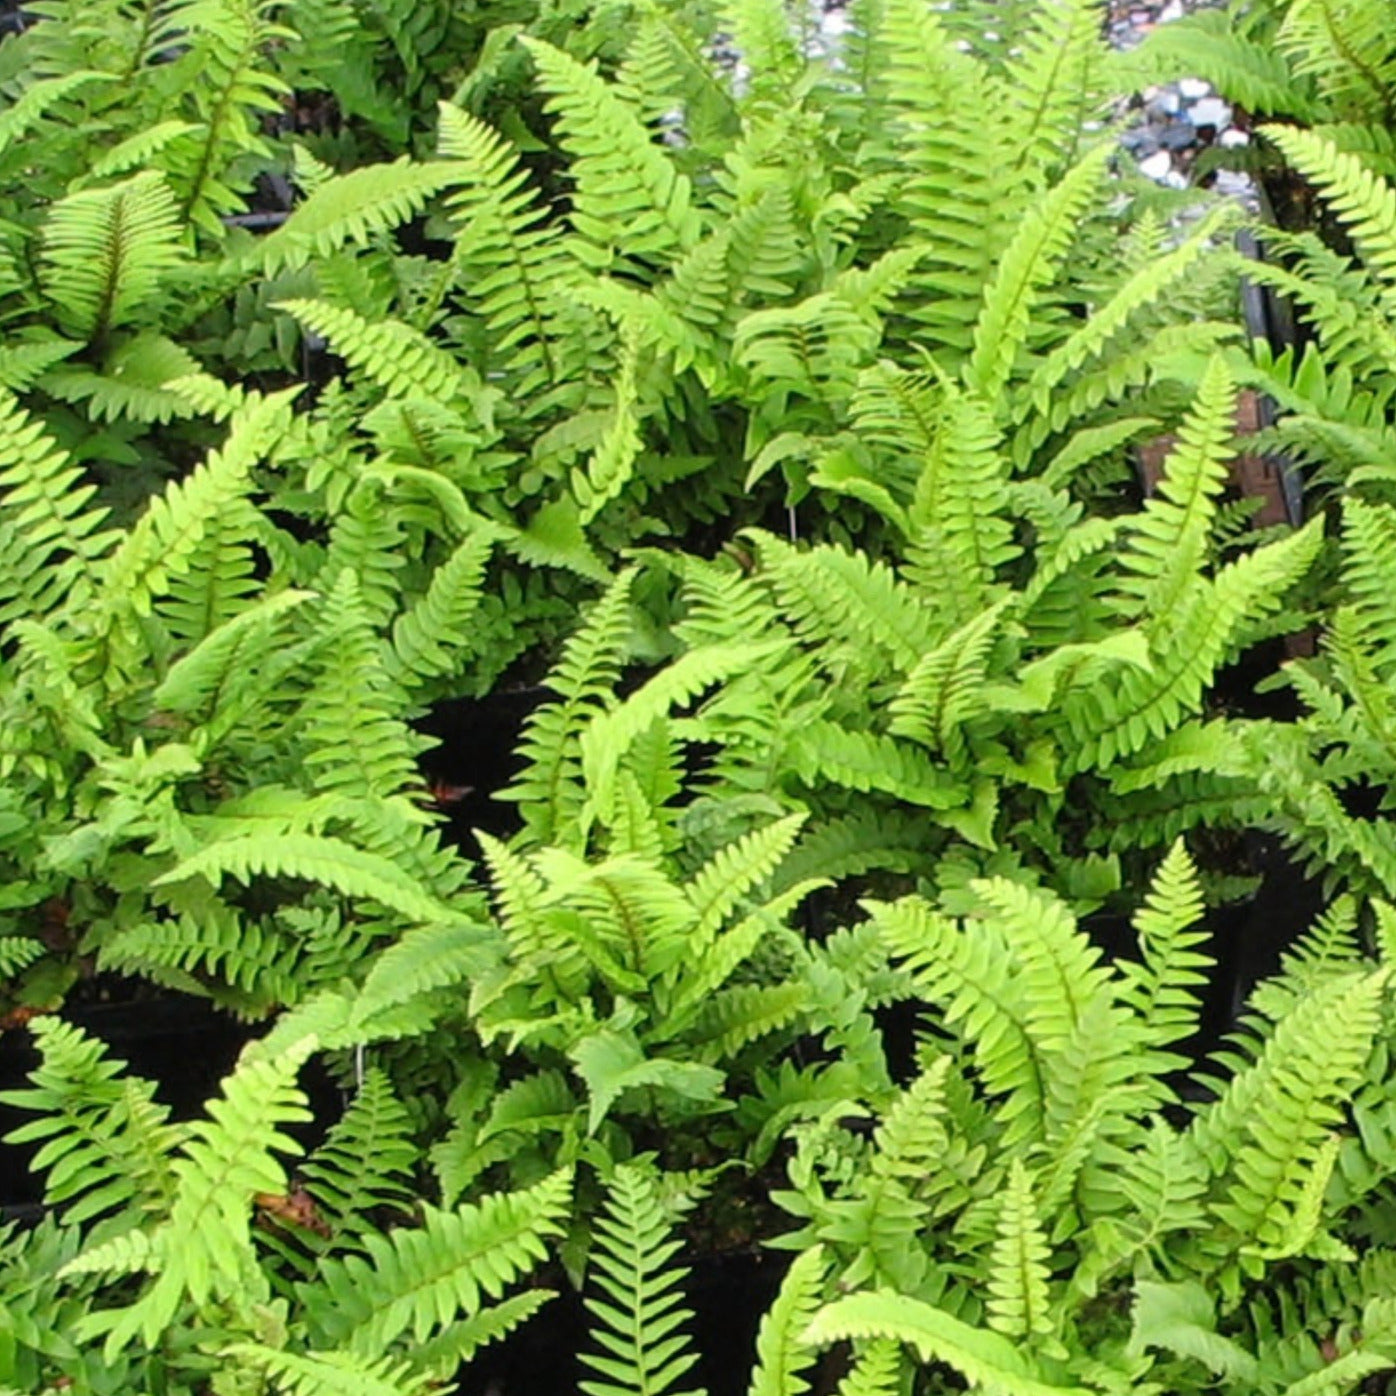 A large cluster of bright green ferns.